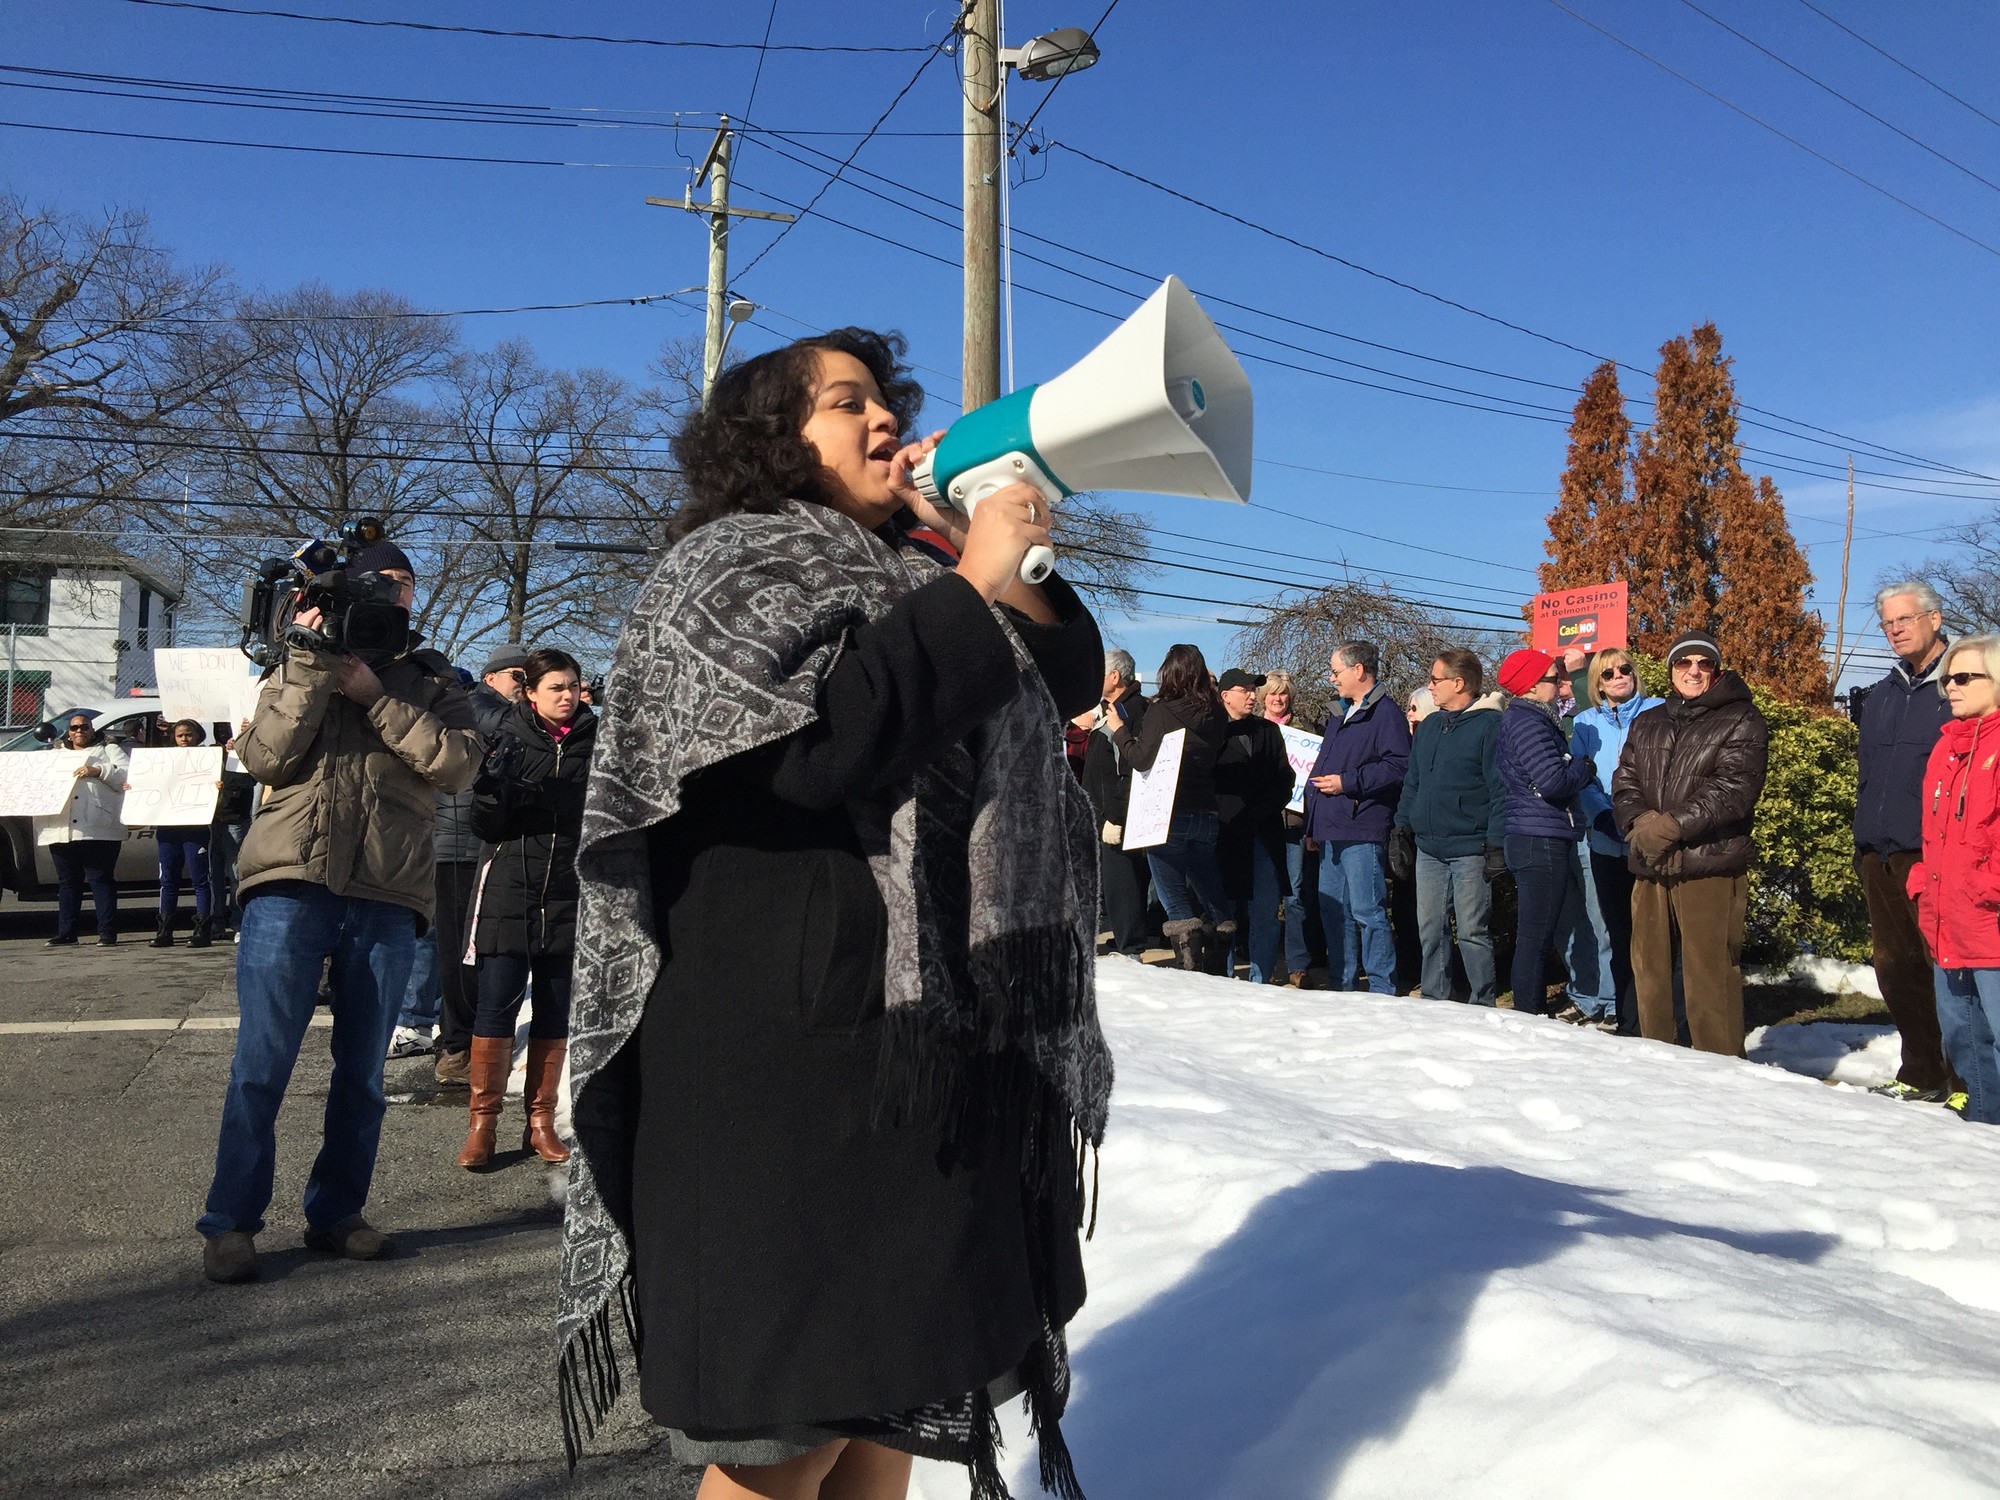 State Assemblywoman Michaelle Solages spoke at an anti-VLT rally on Jan. 30. A bill to repeal legislation allowing VLTs on Long Island was introduced in the State Senate on March 17. She co sponsored a similar bill in the Assembly.